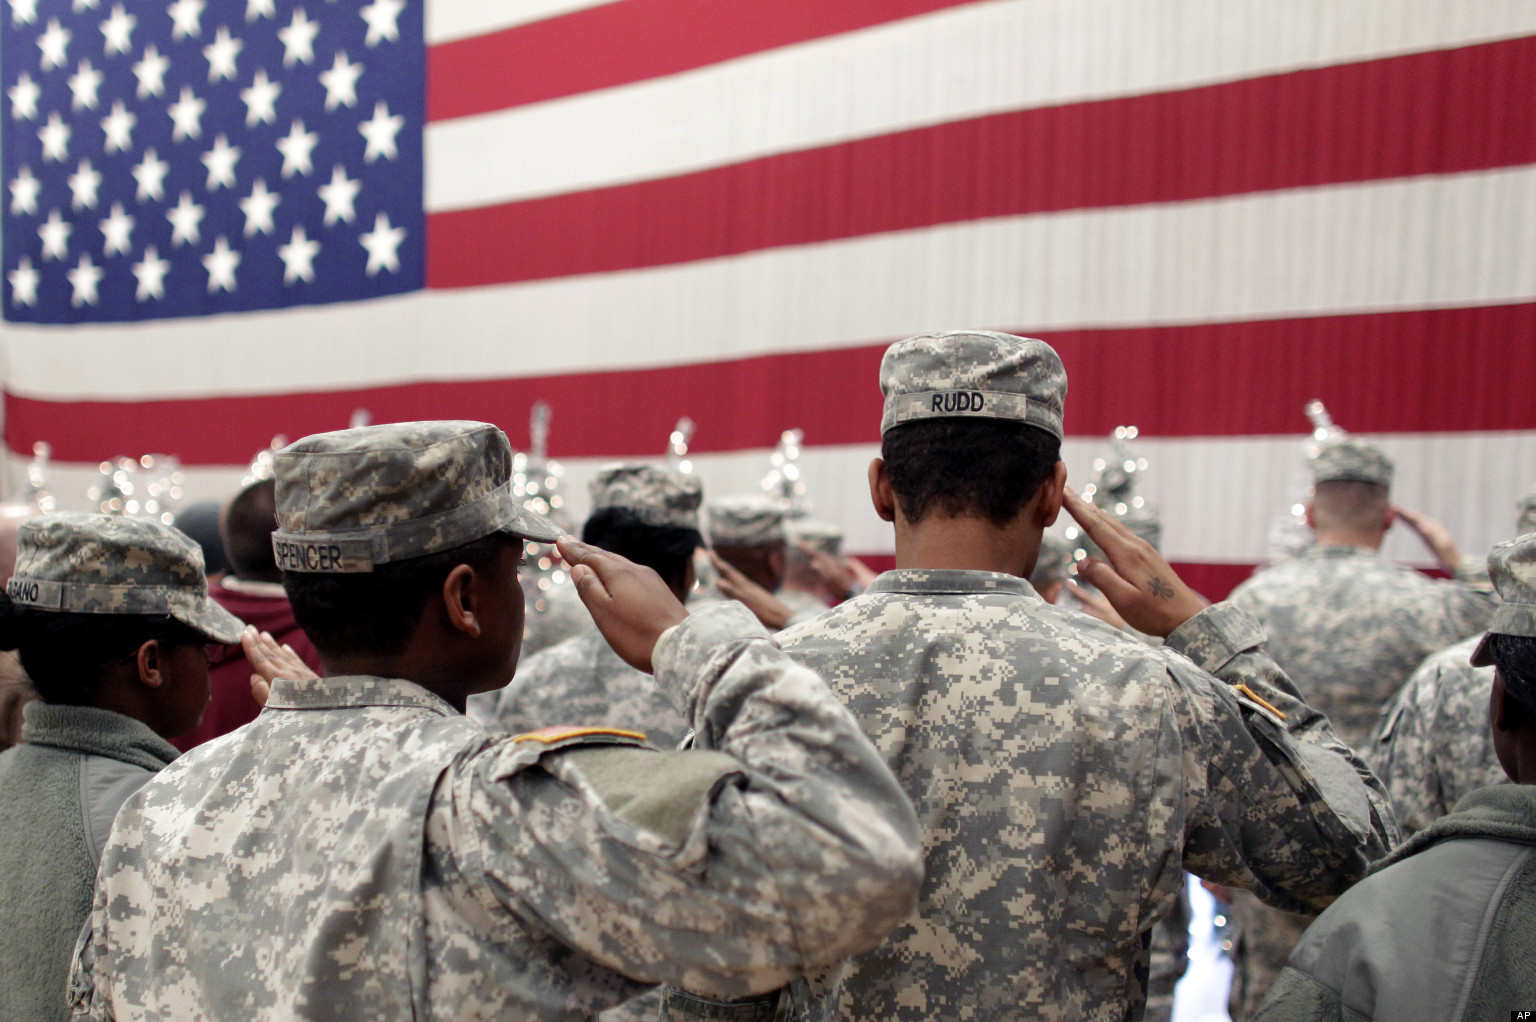 Can You Match These Definitions to the Words That Every 12-Year-Old Already Knows? Soldiers